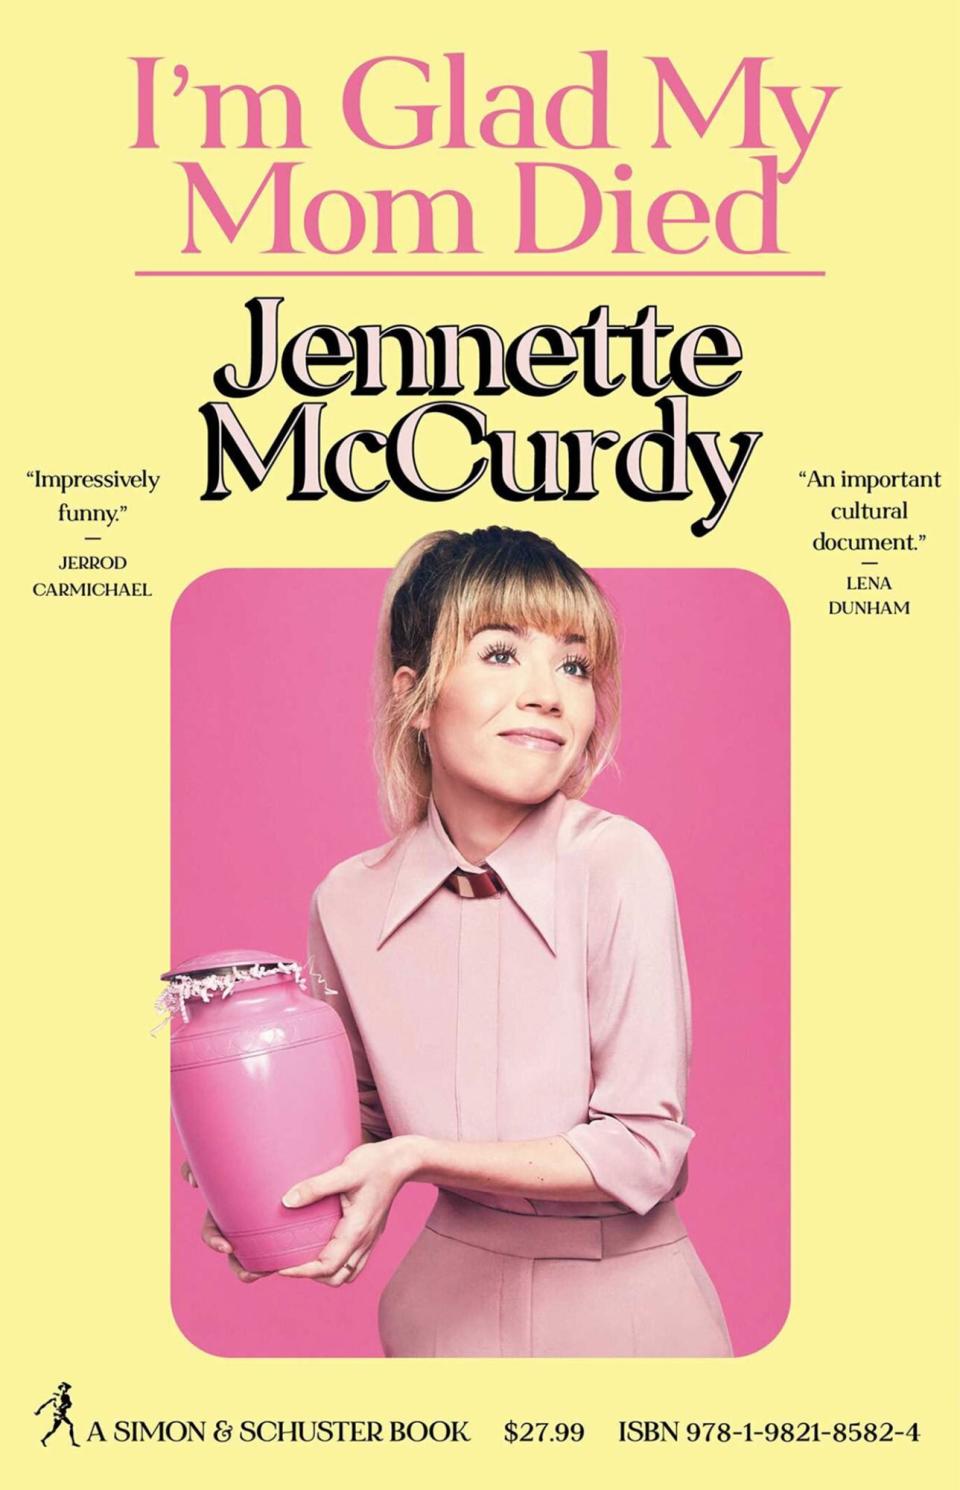 'I'm Glad My Mom Died,' by Jennette McCurdy